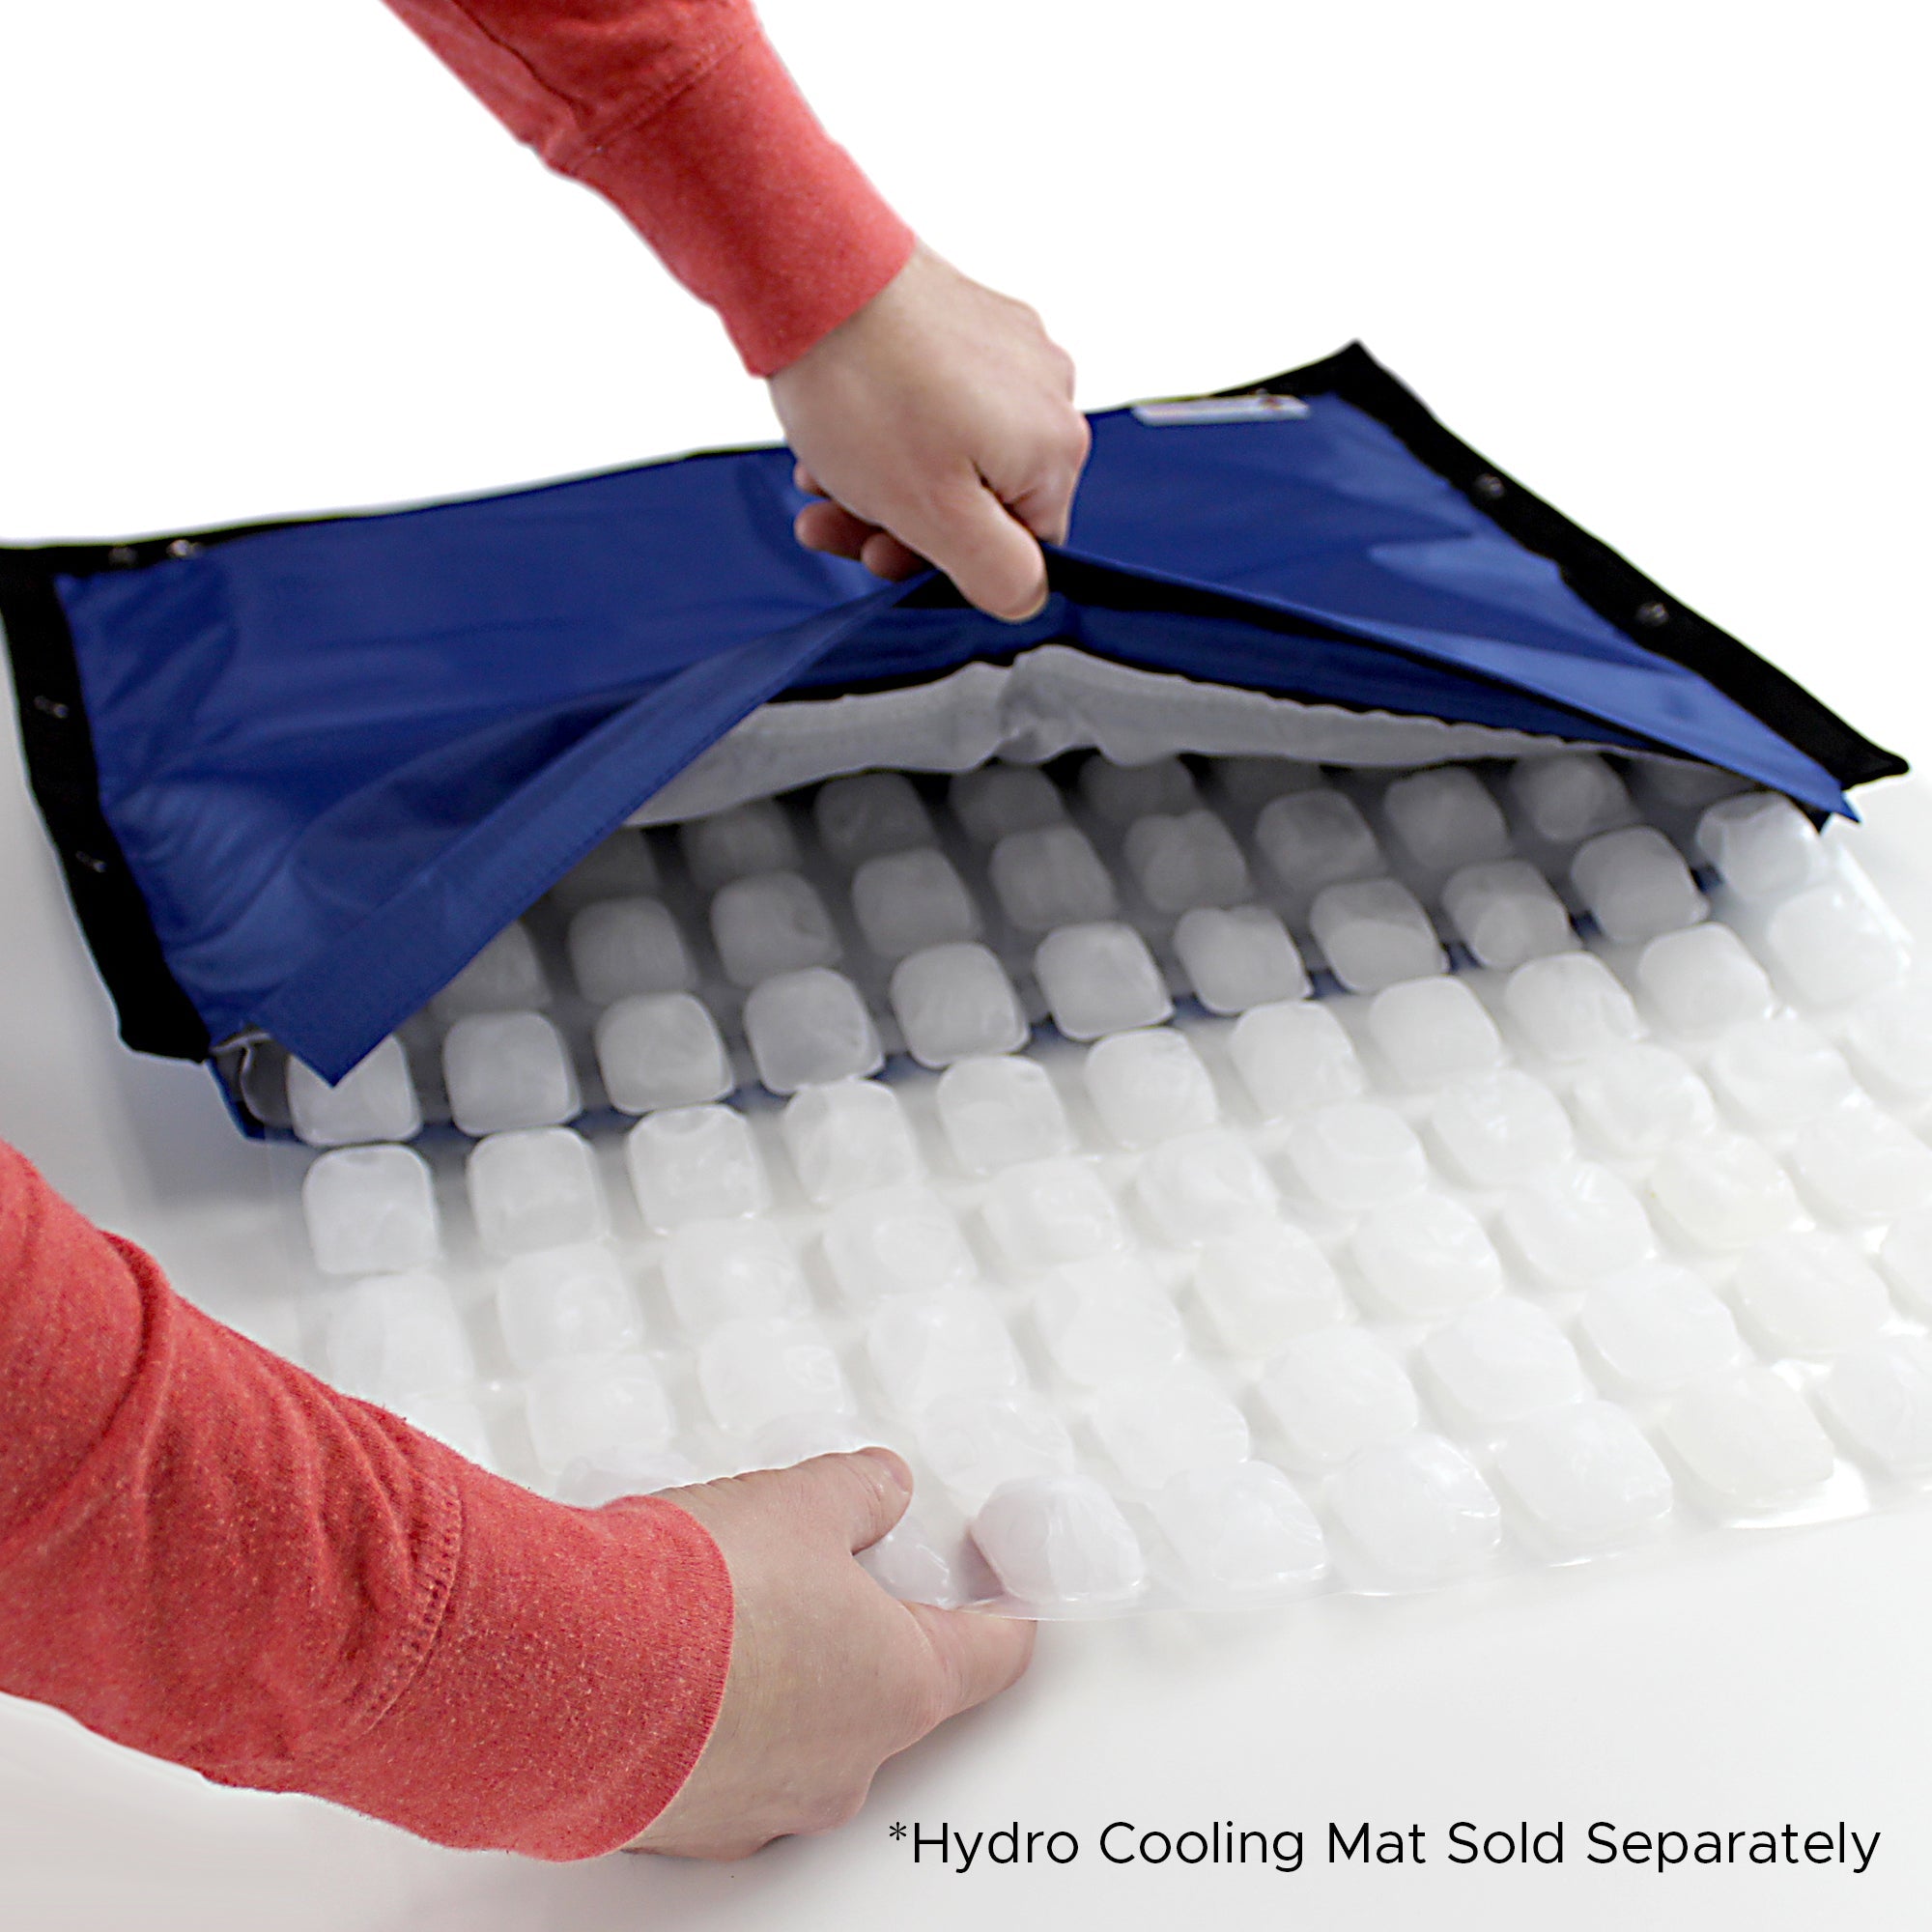 FlexiFreeze ice sheet being inserted into a CoolerDog Hydro Cooling Mat